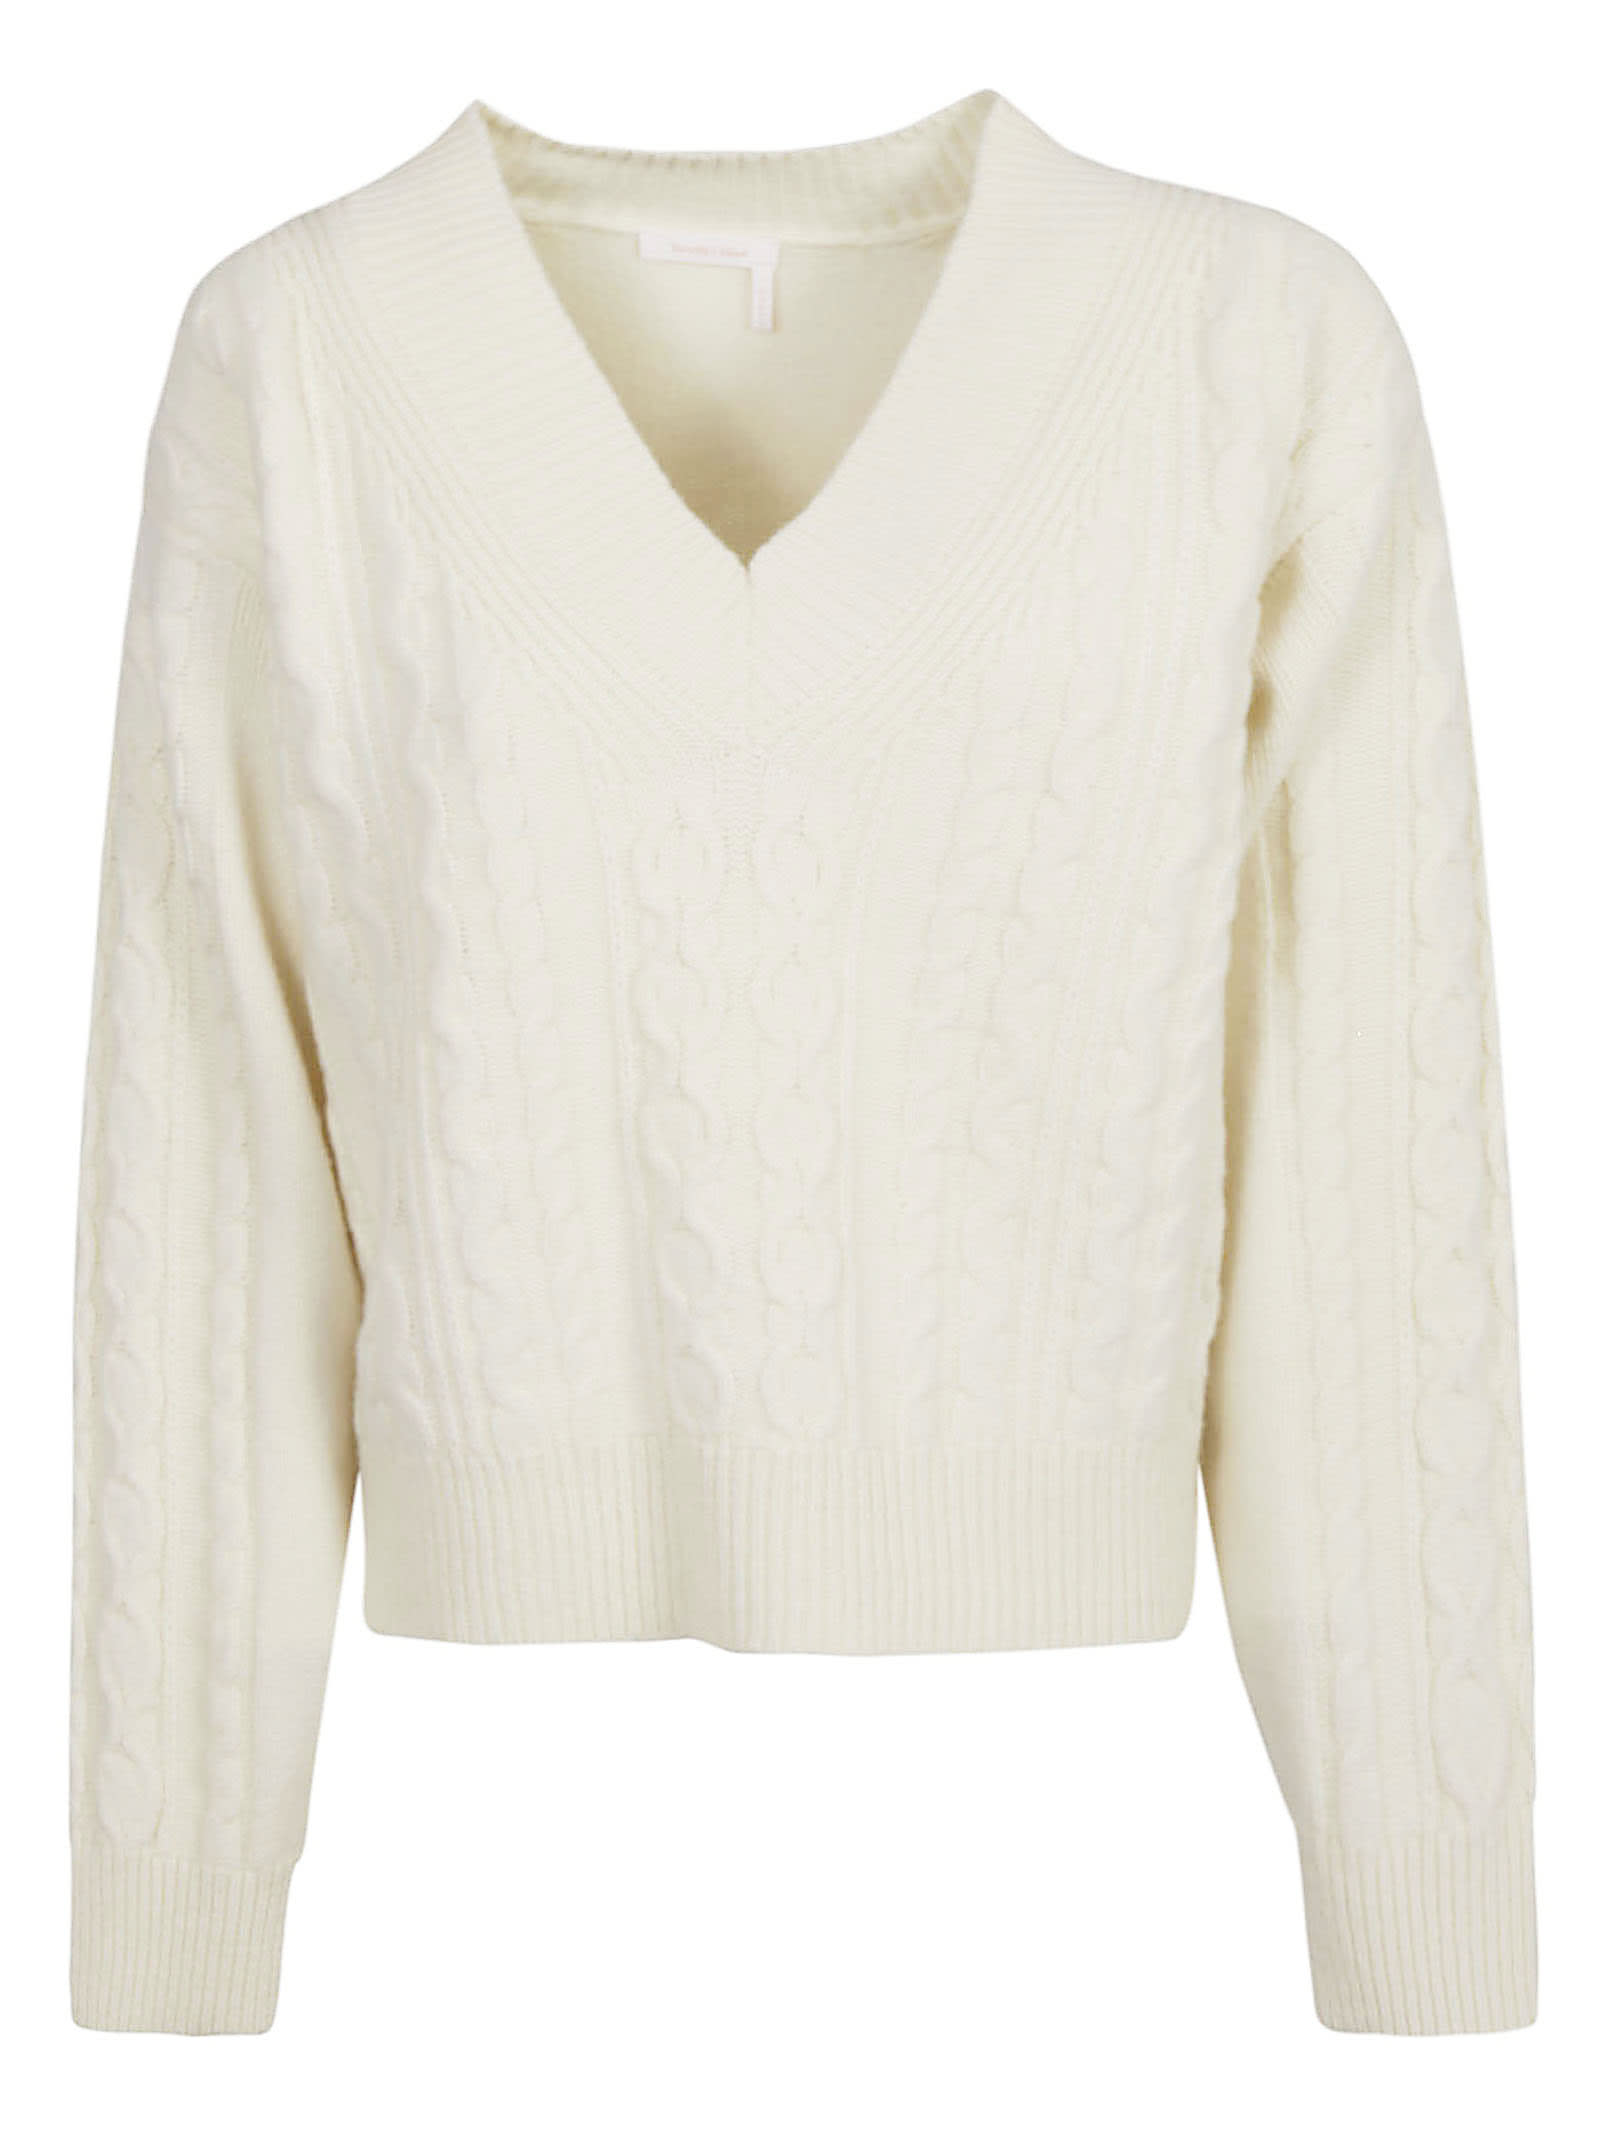 See by Chloé Patterned V-neck Ribbed Sweater